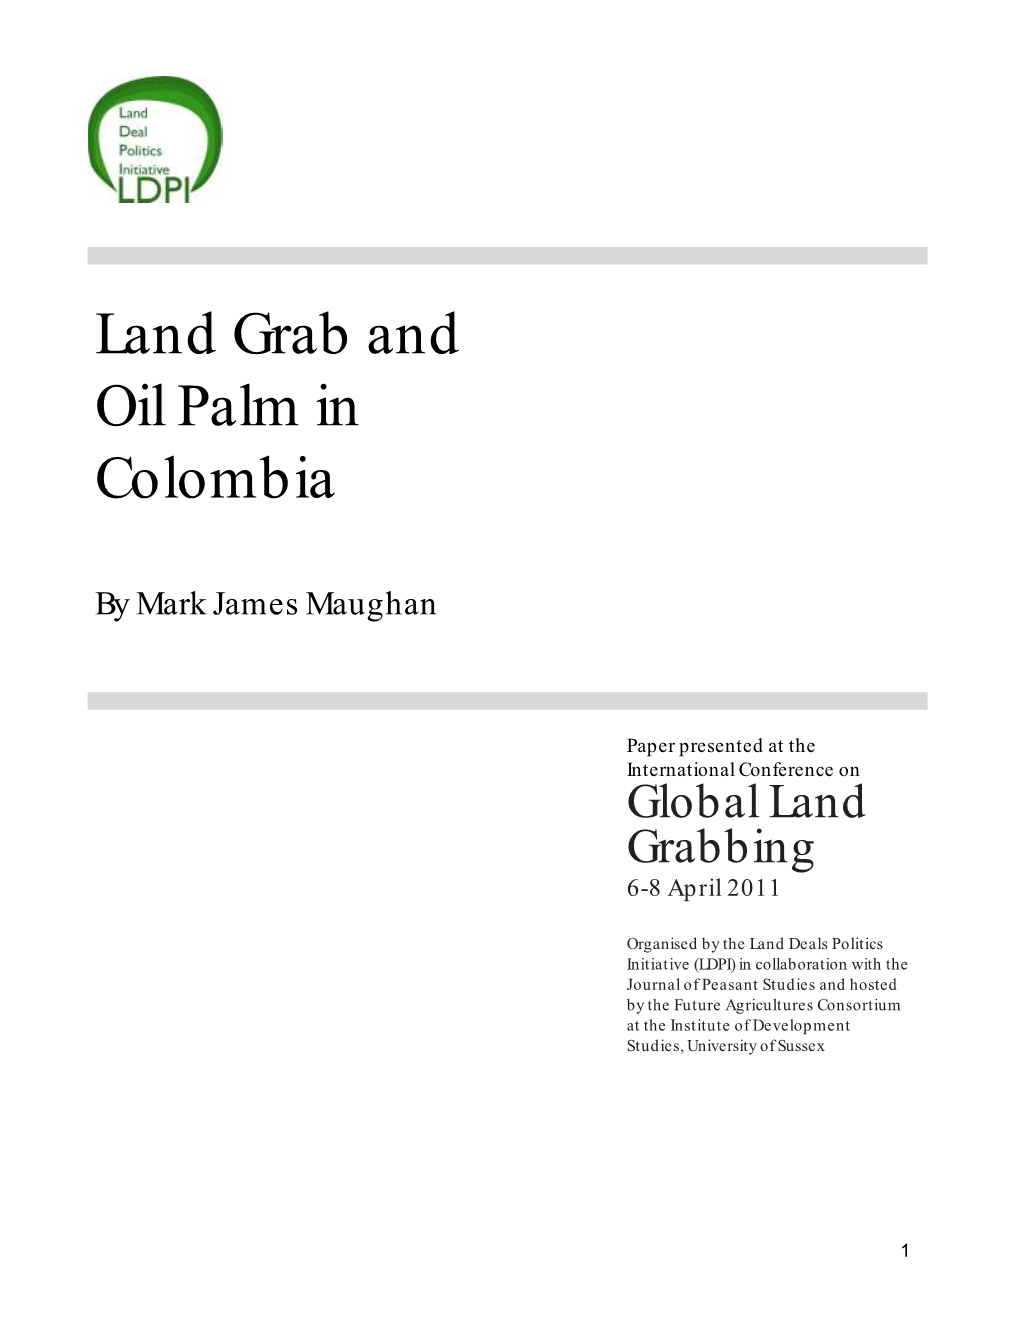 Land Grab and Oil Palm in Colombia